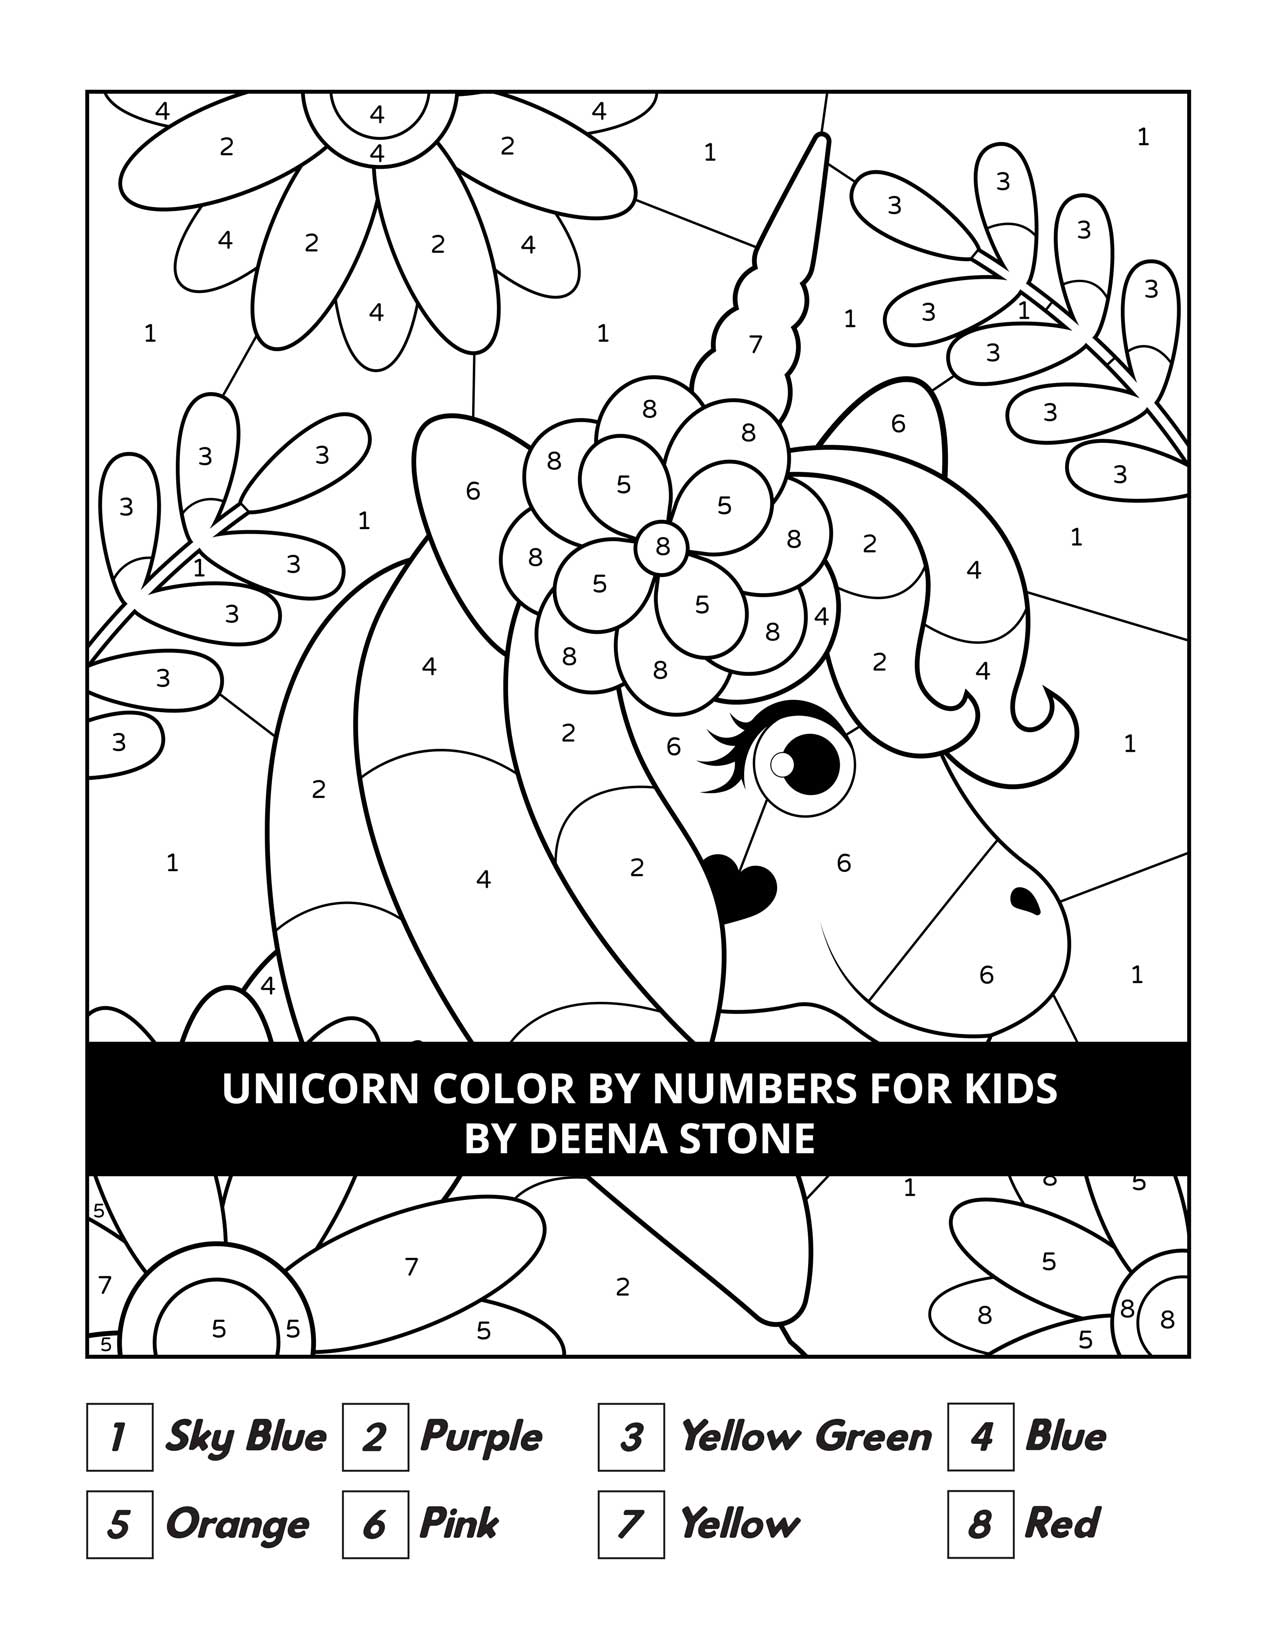 Unicorn Color By Numbers For Kids Deena Stone